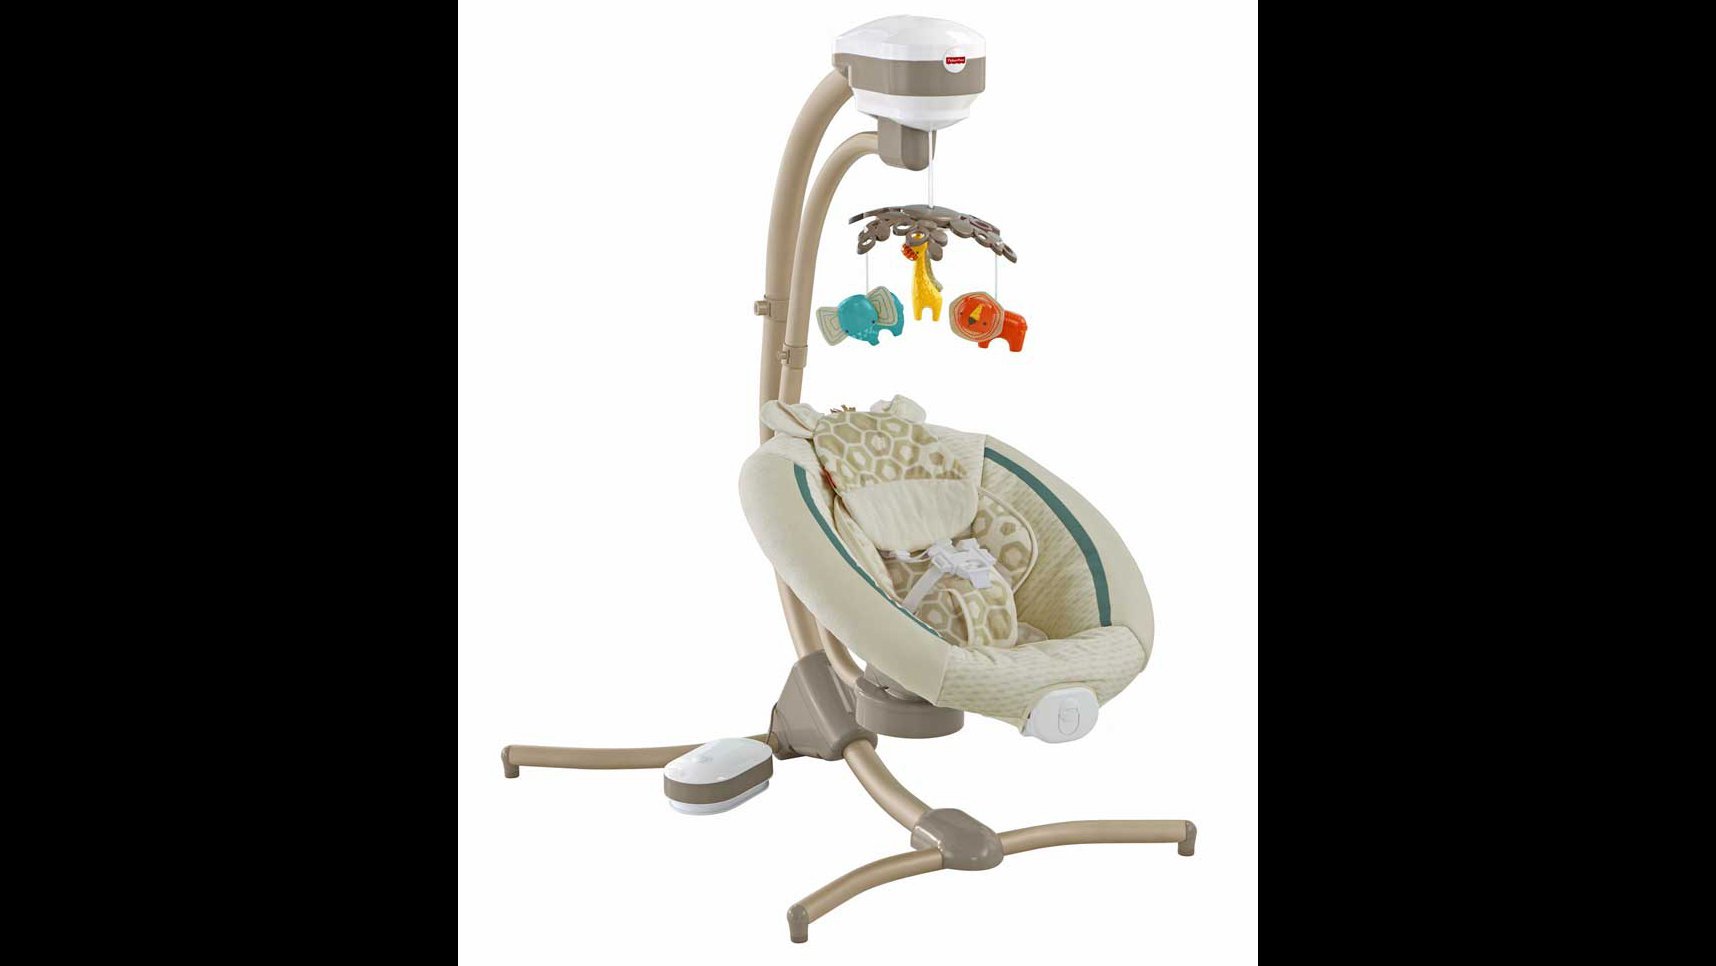 Thousands of Fisher-Price cradle swings have been recalled after reports that the moving seat has fallen, according to the U.S. Consumer Product Safety Commission. The "Cradle n' Swing," which rocks side to side or head to toe with "speeds from low to high" and a mobile that hangs above, has a peg that holds the seat to the base.